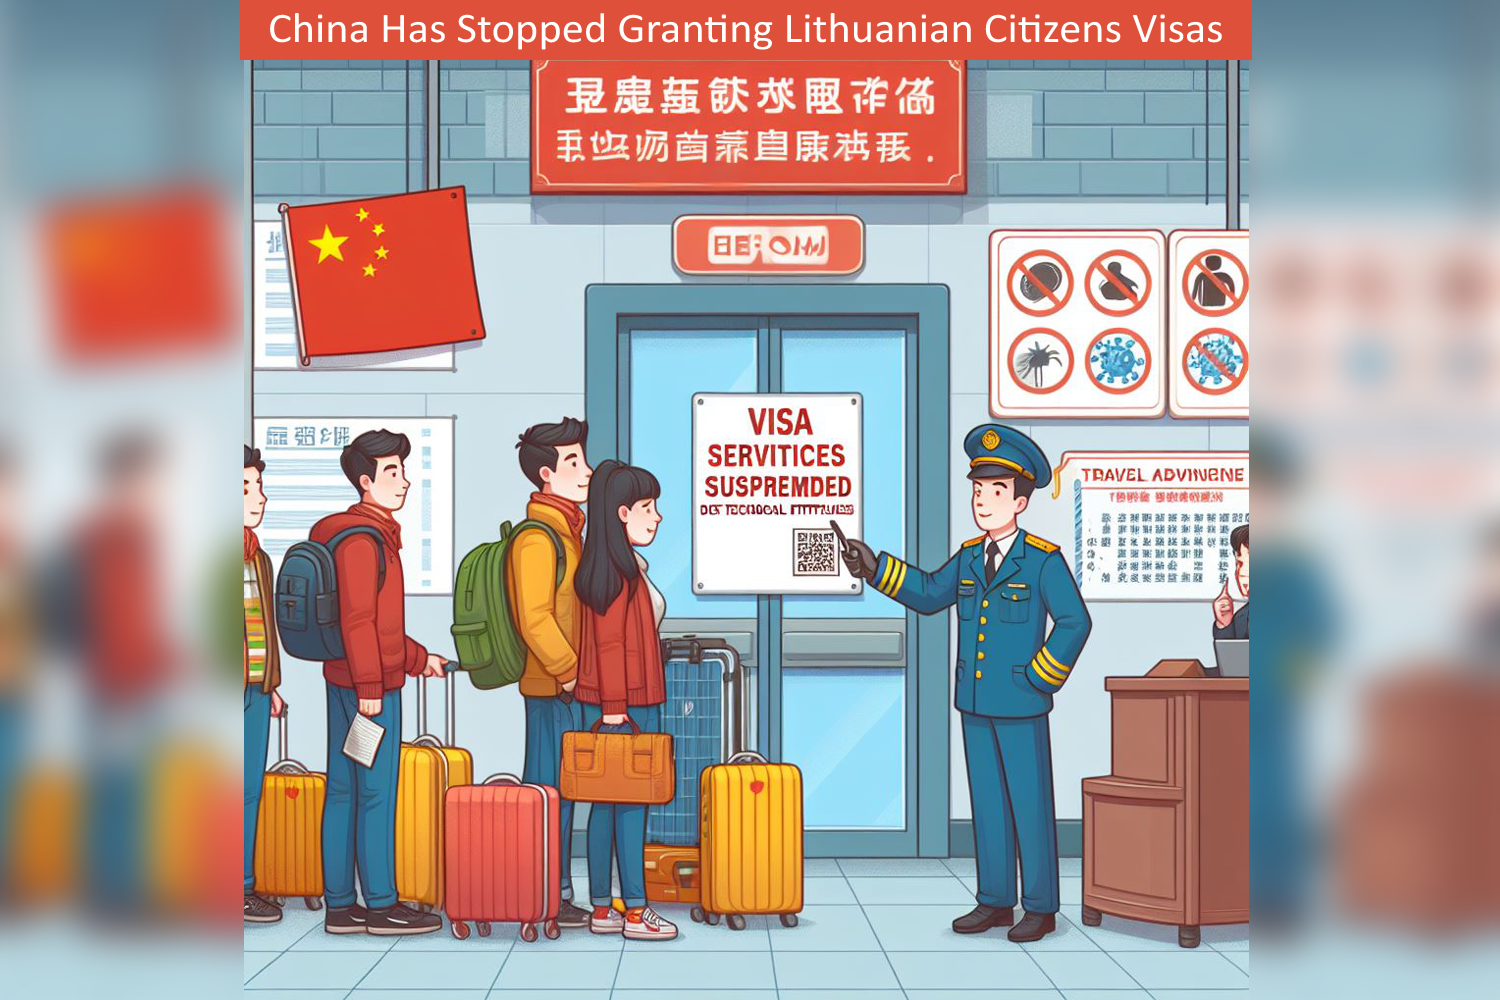 China Has Stopped Granting Lithuanian Citizens Visas.